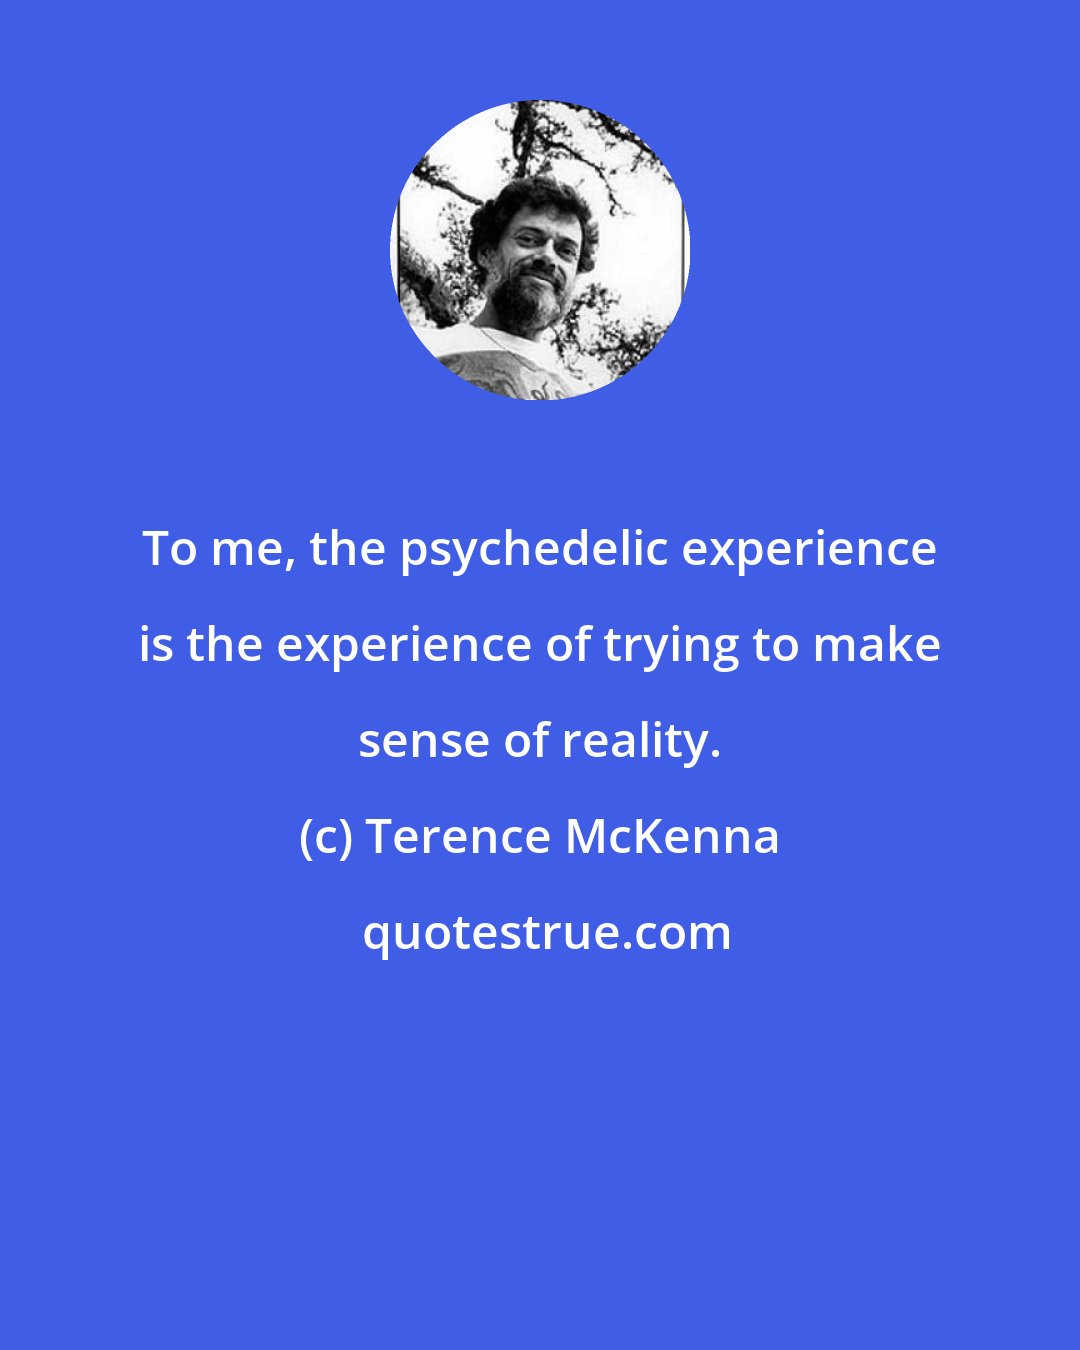 Terence McKenna: To me, the psychedelic experience is the experience of trying to make sense of reality.